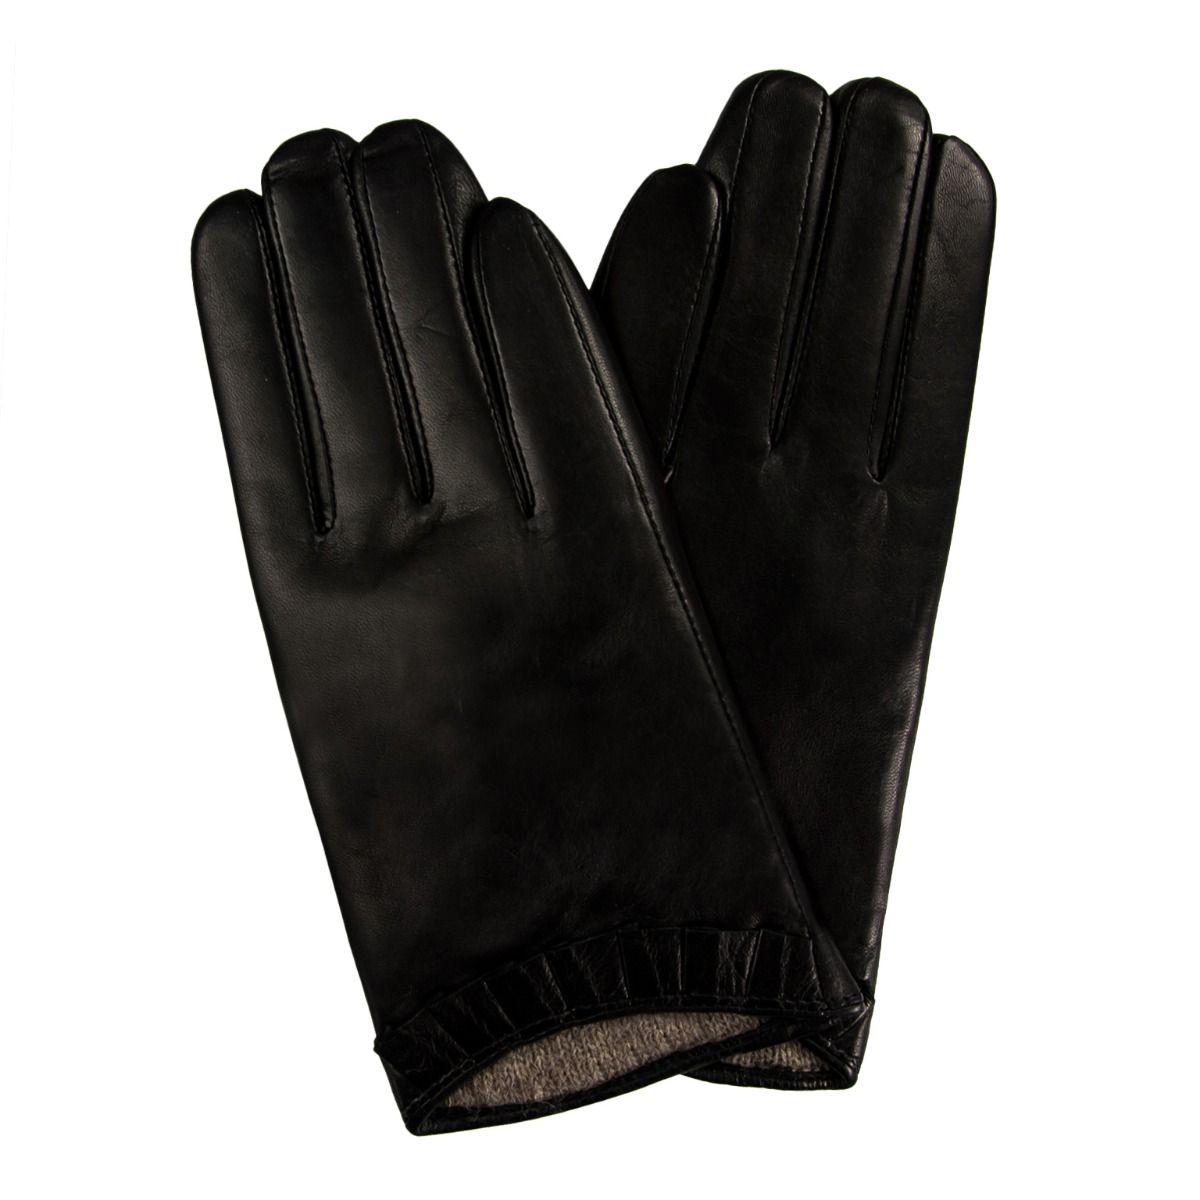 Leather gloves - Allora image 1